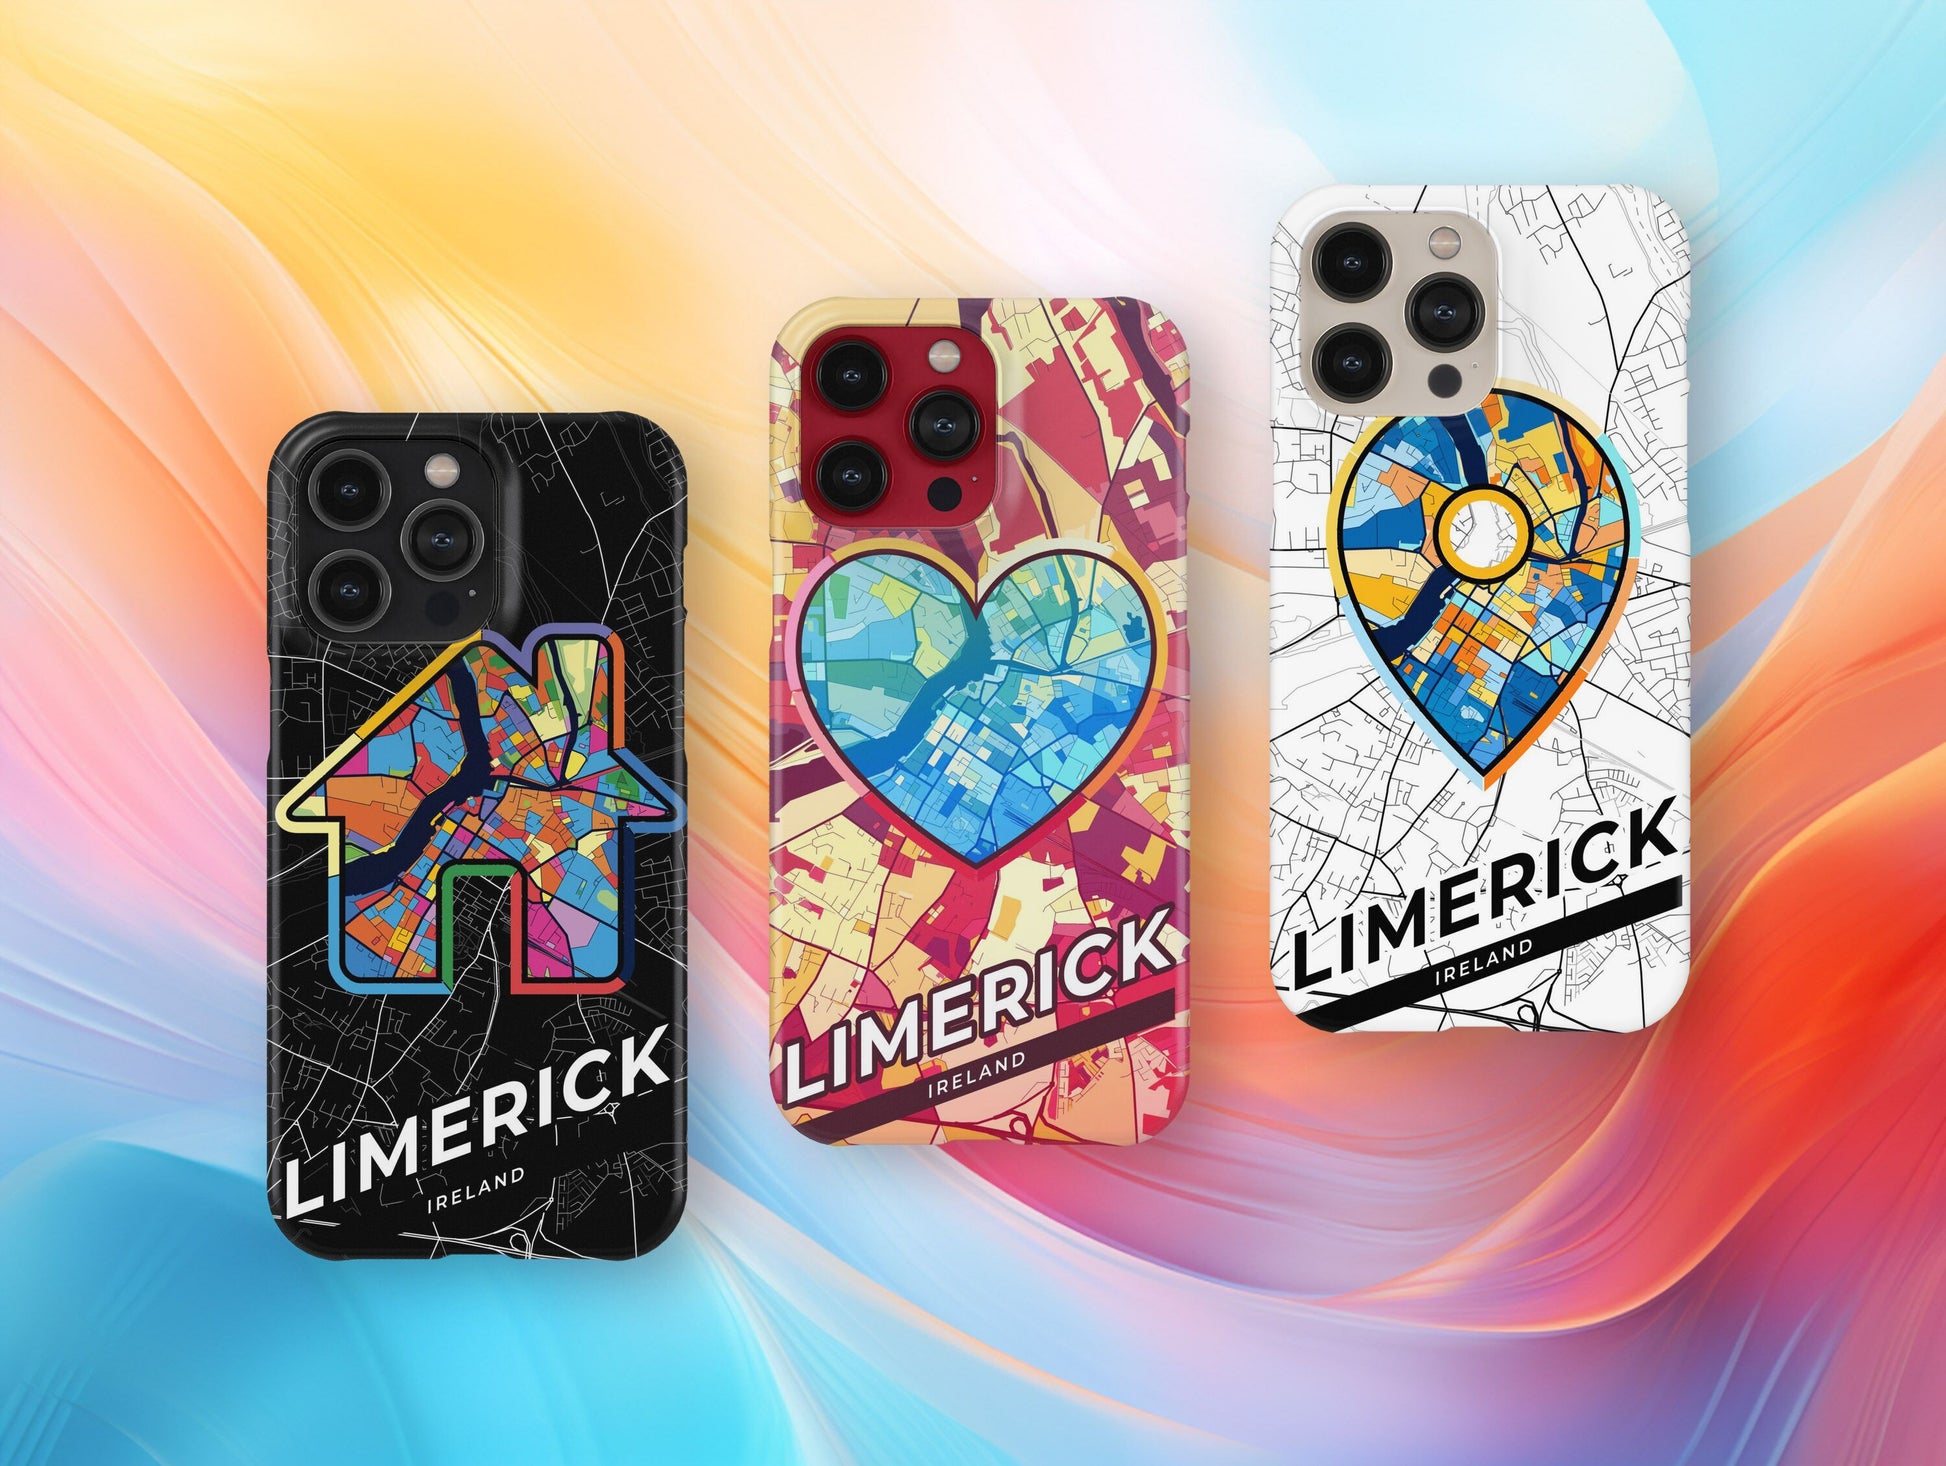 Limerick Ireland slim phone case with colorful icon. Birthday, wedding or housewarming gift. Couple match cases.